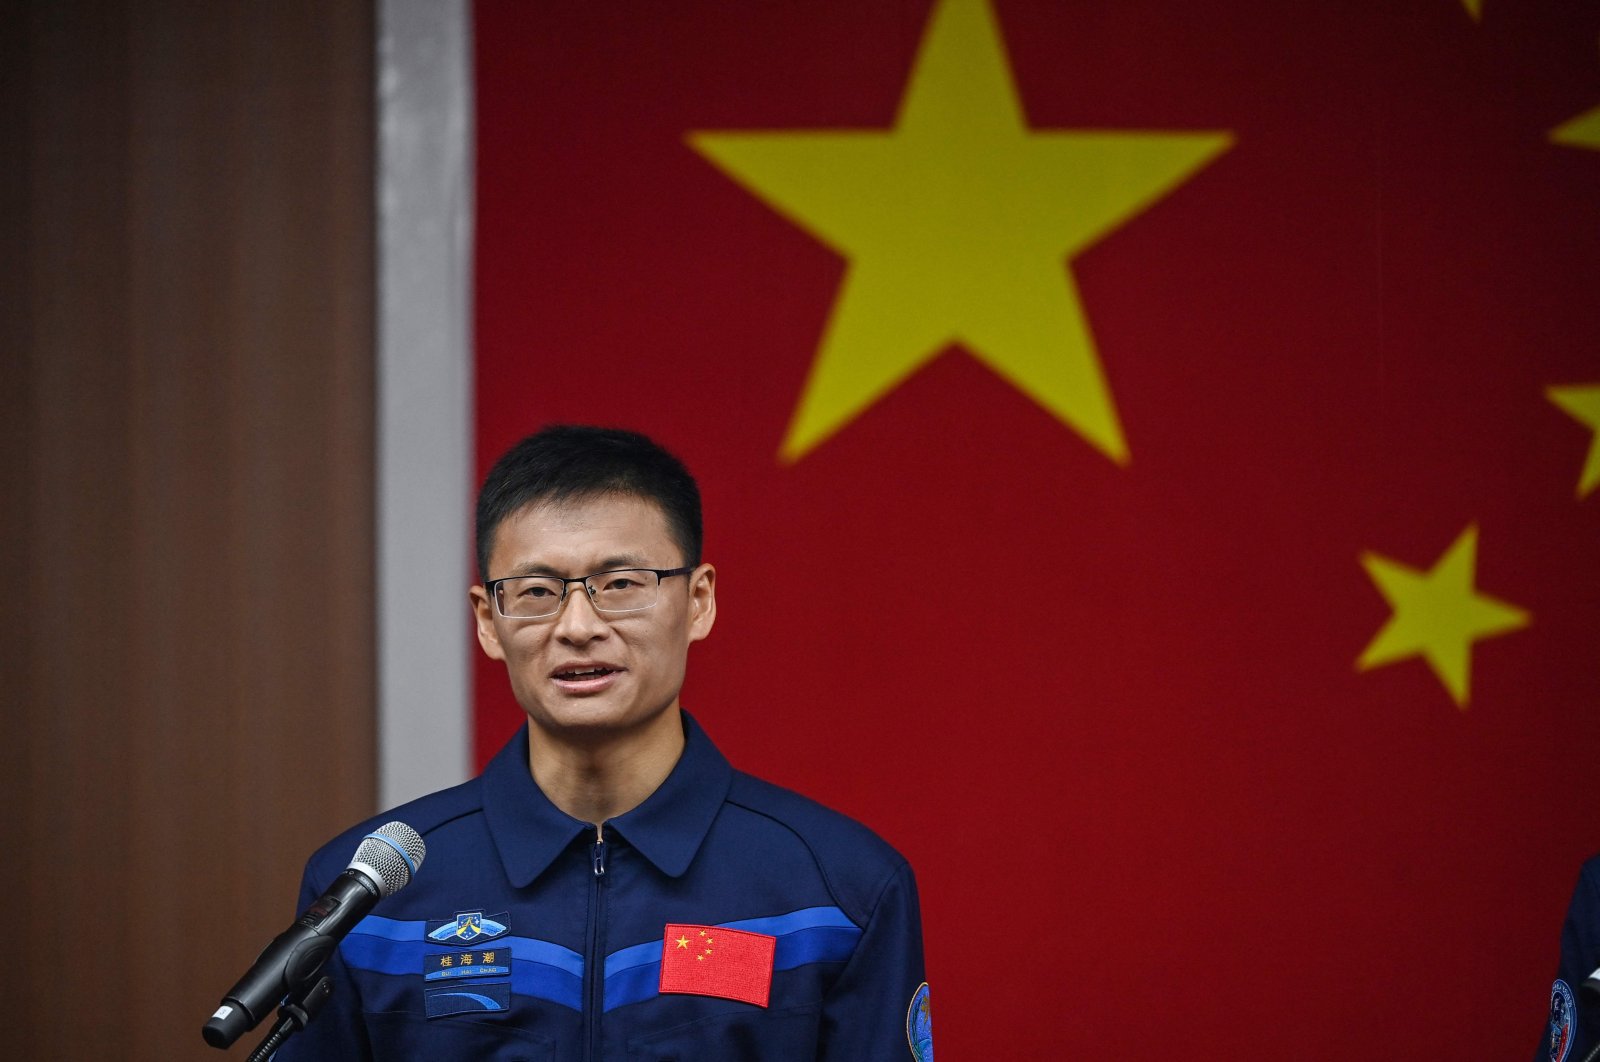 Taikonauts Gui Haichao payload expert of the Shenzhou-16 Manned Space Flight Mission speaks during a press conference at the Jiuquan Satellite Launch Center, in northwestern Gansu province, China, May 29, 2023. (AFP Photo)